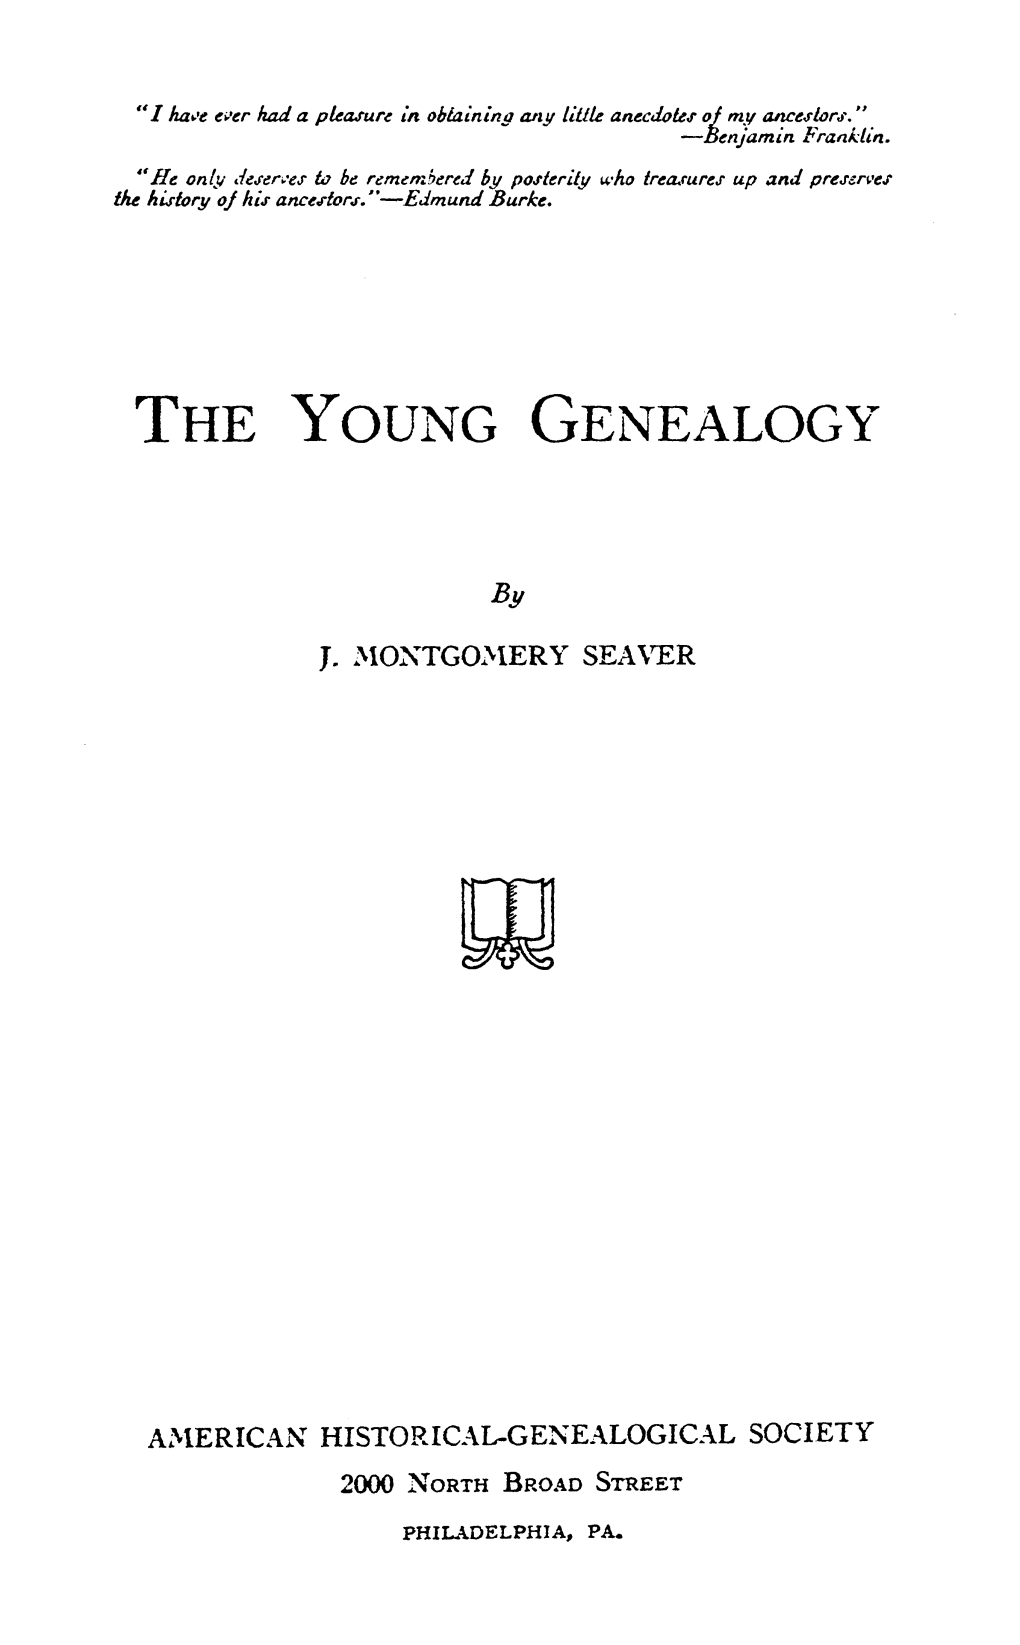 The Young Genealogy